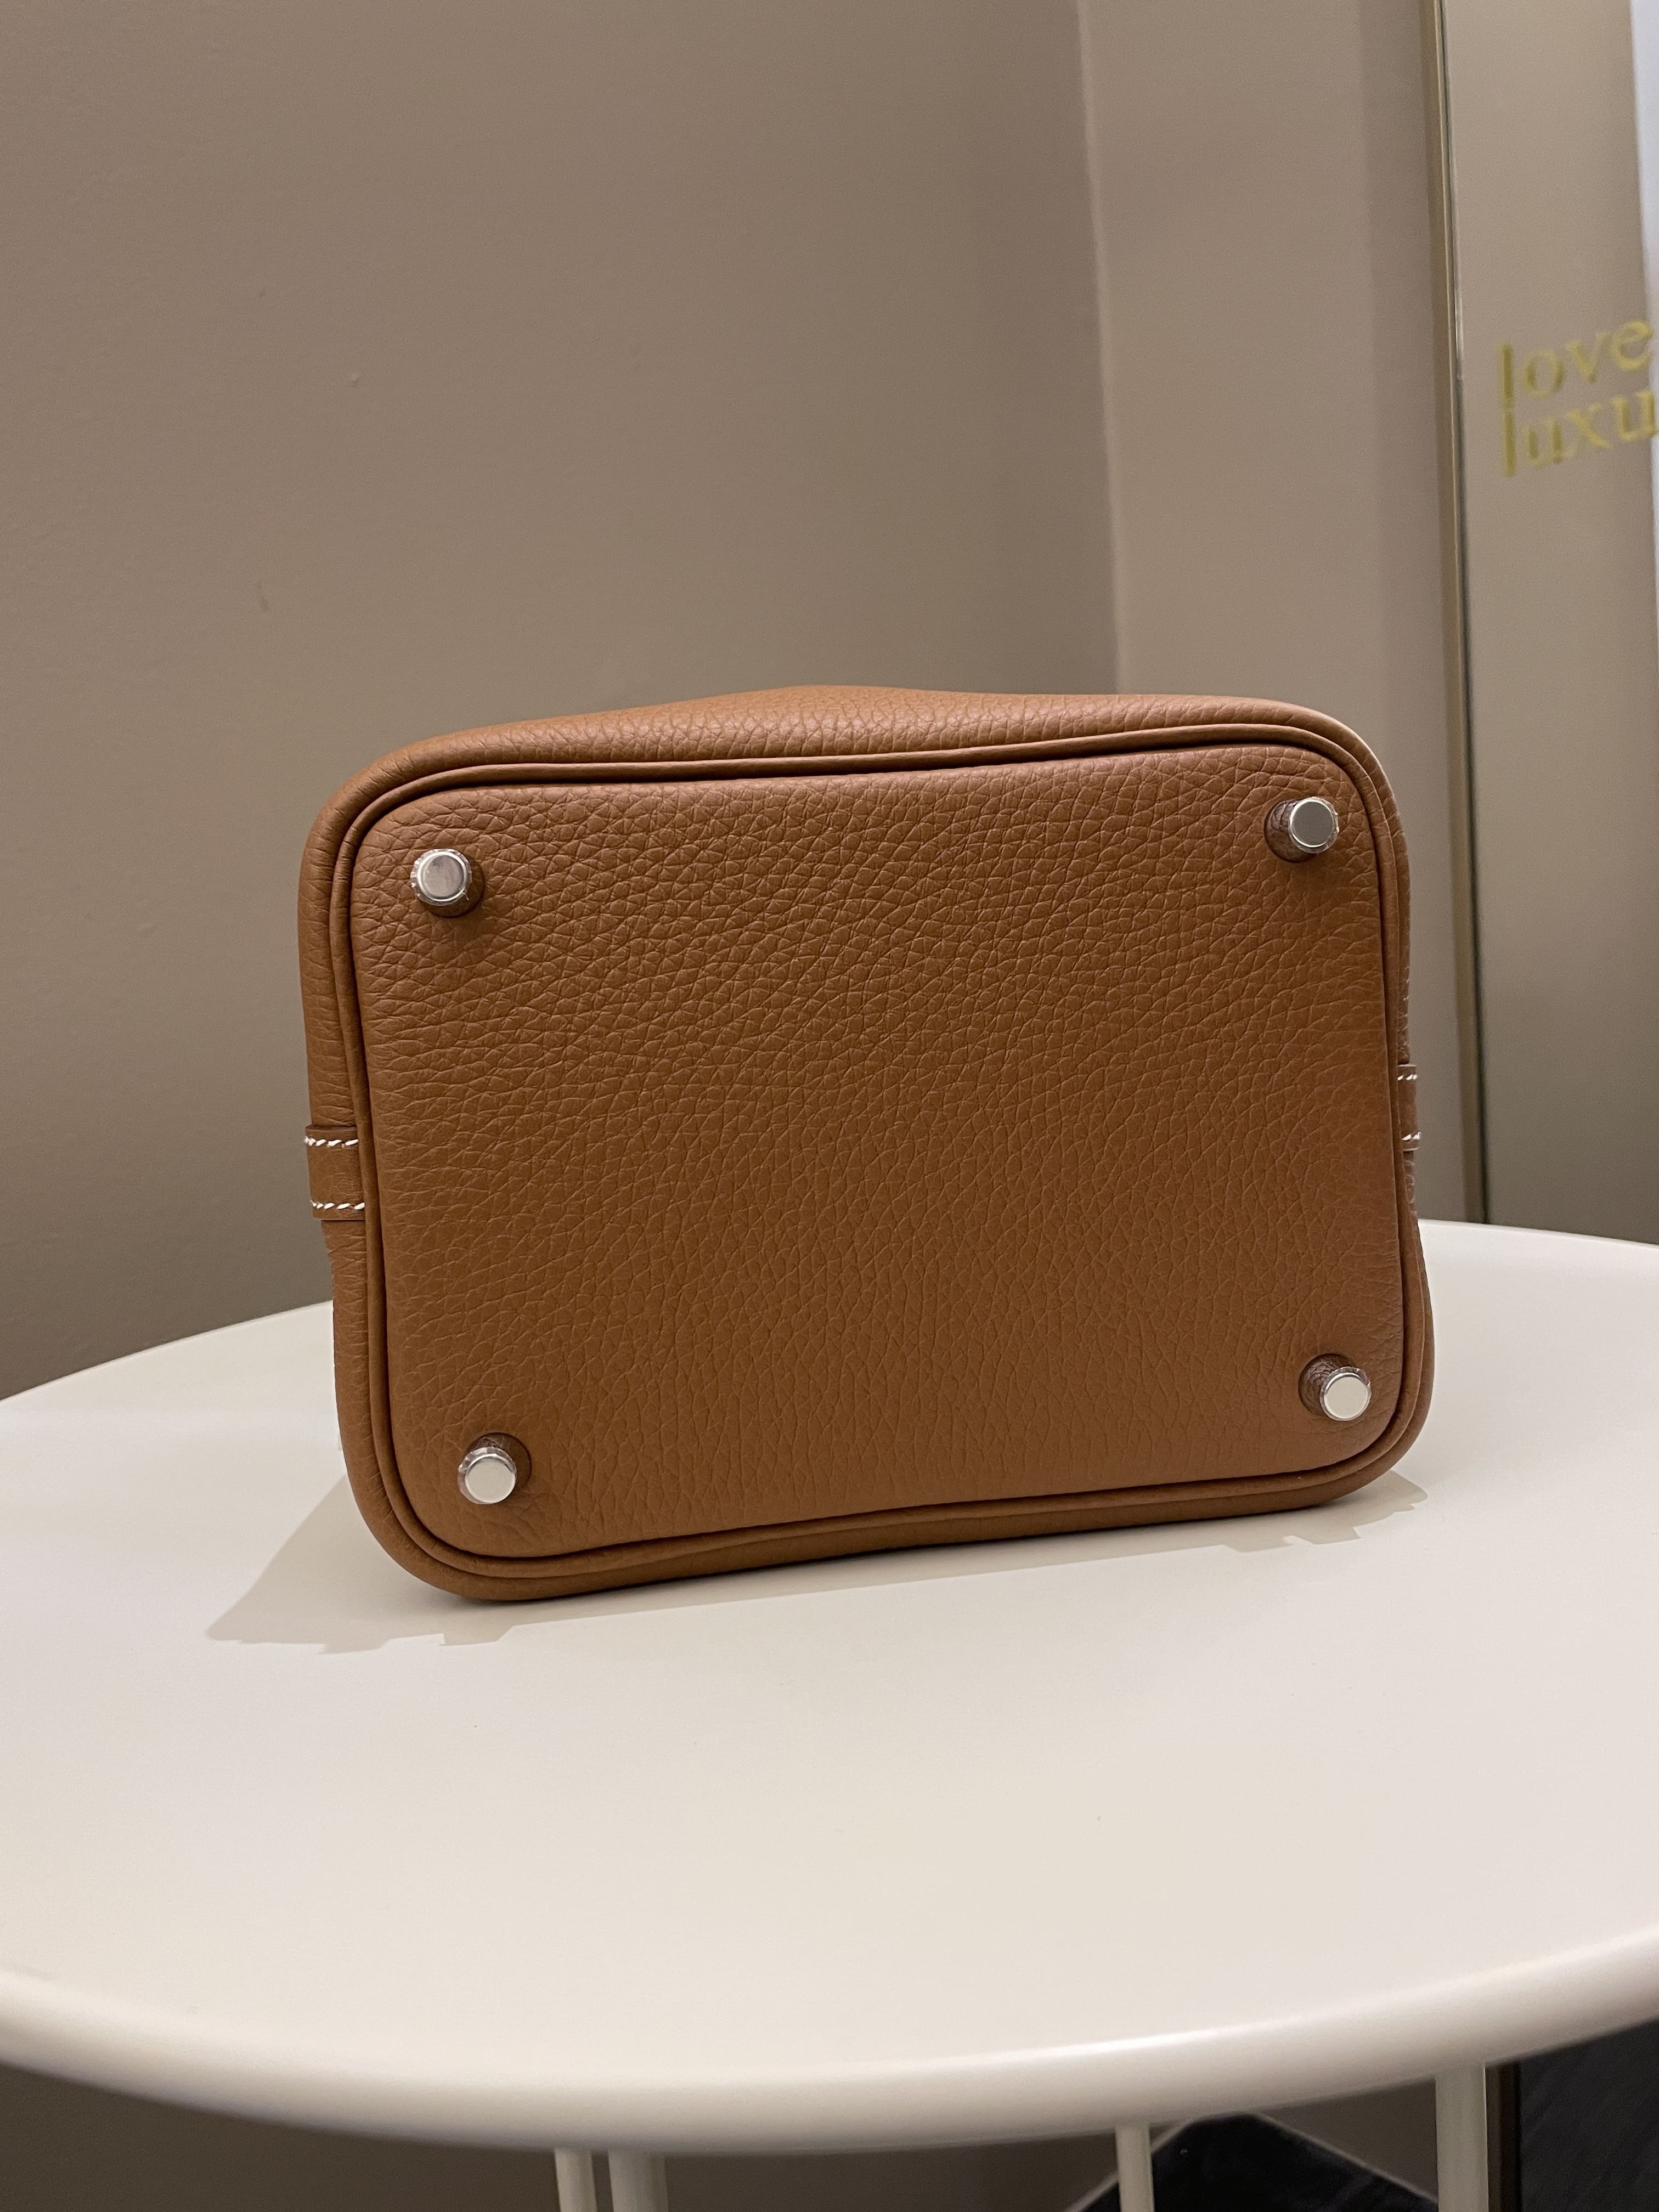 Hermes Picotin Lock PM 18 Gold Clemence